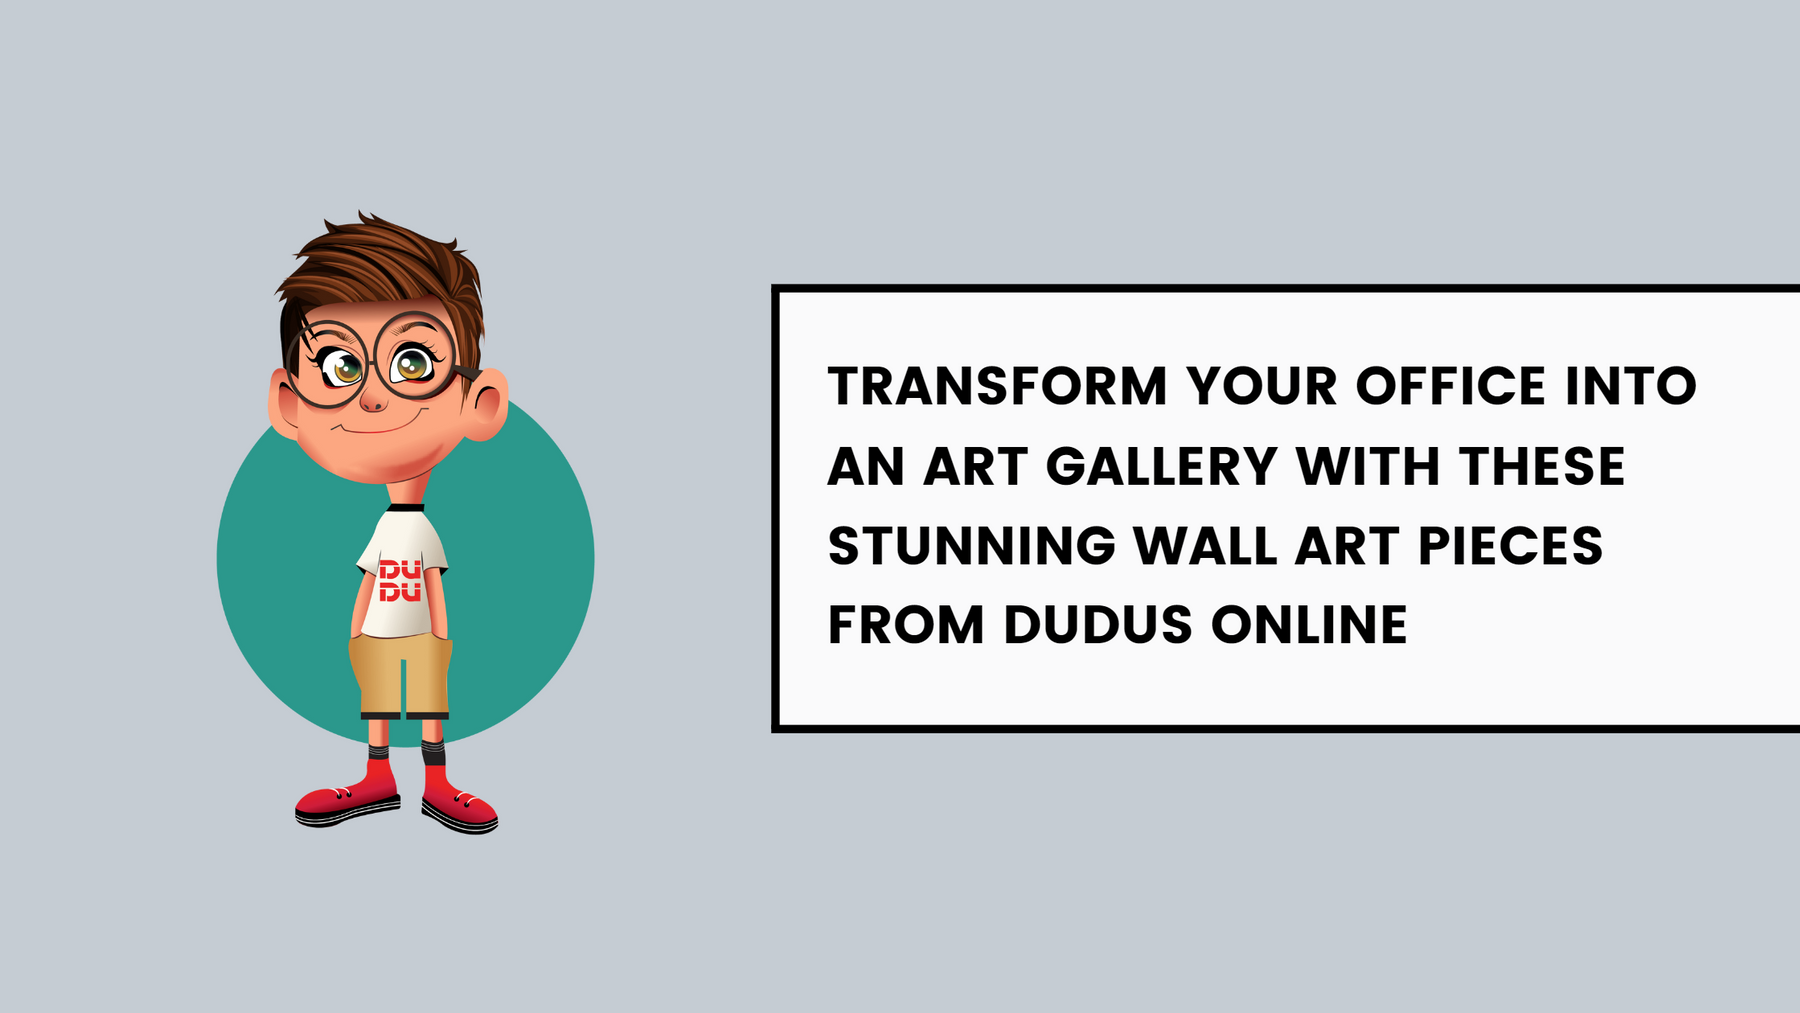 Transform Your Office Into An Art Gallery With These Stunning Wall Art Pieces From Dudus Online